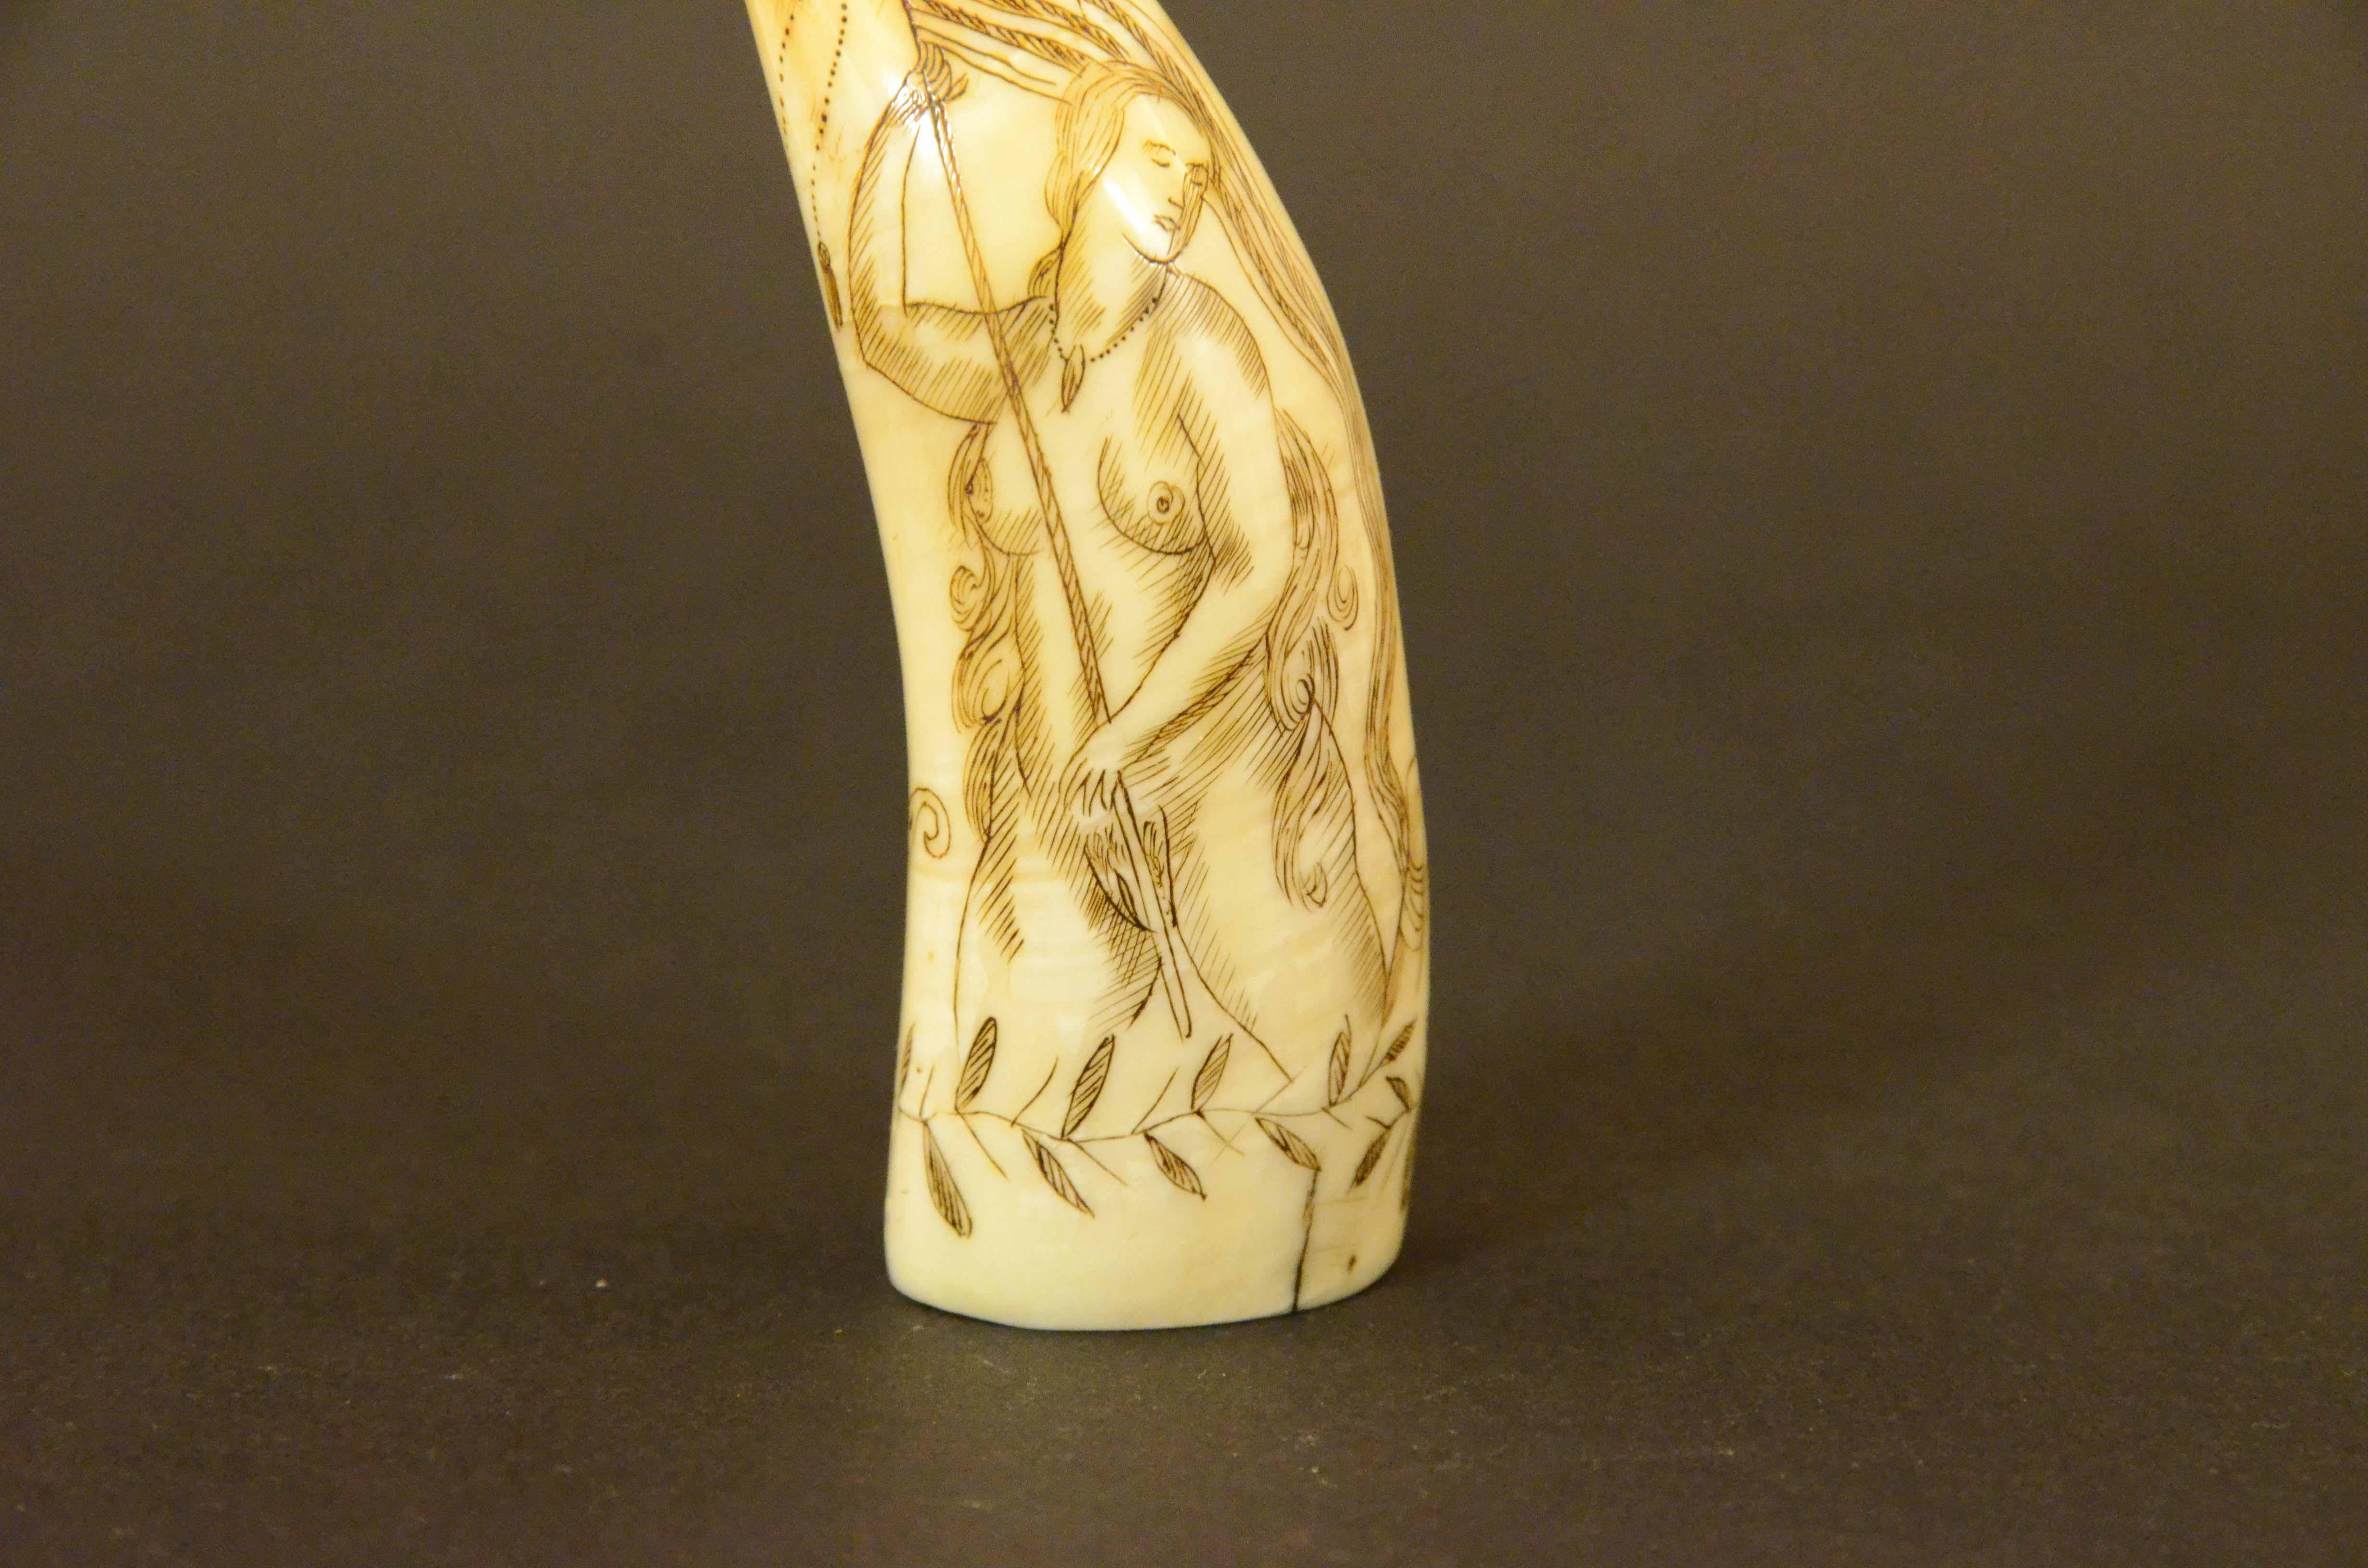 Scrimshaw of an engraved whale tooth, depicting  naked woman with a very  end,  with  long hair and turgid breasts  flying the American flag, on the back large vessel with sails unfurled with islands in the background, on the side the name of the